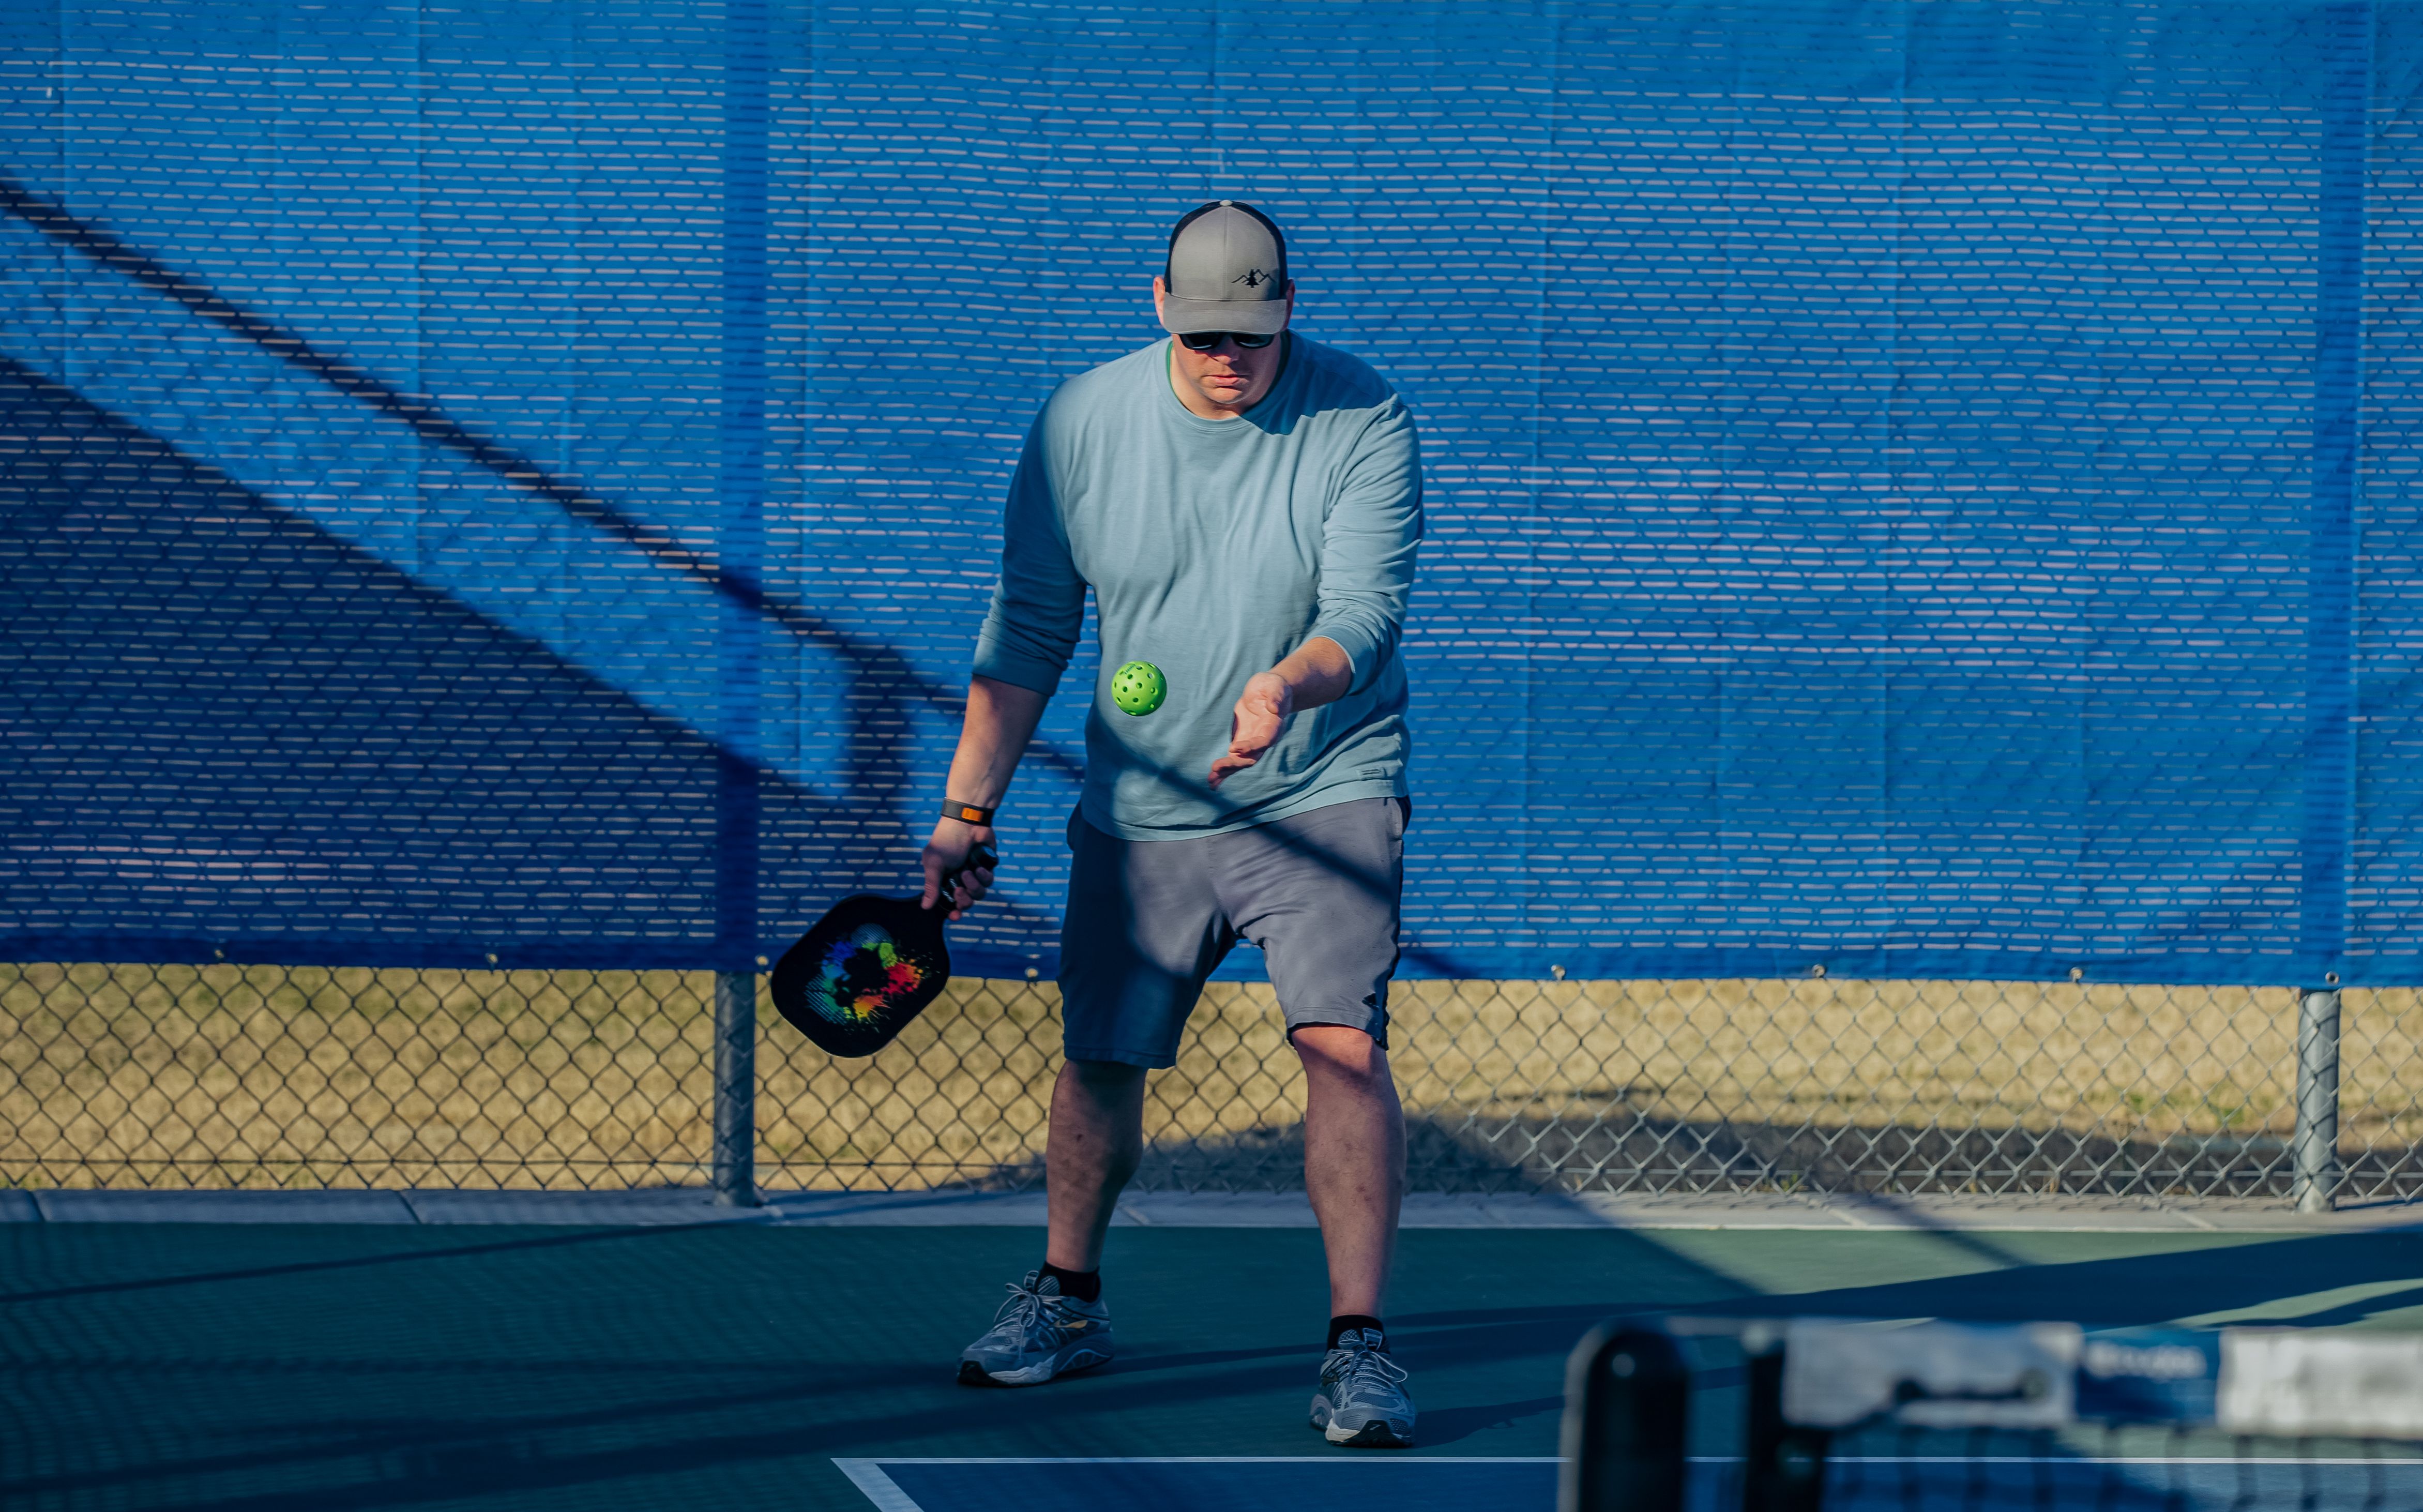 Player prepares to hit a ball in a game of pickleball